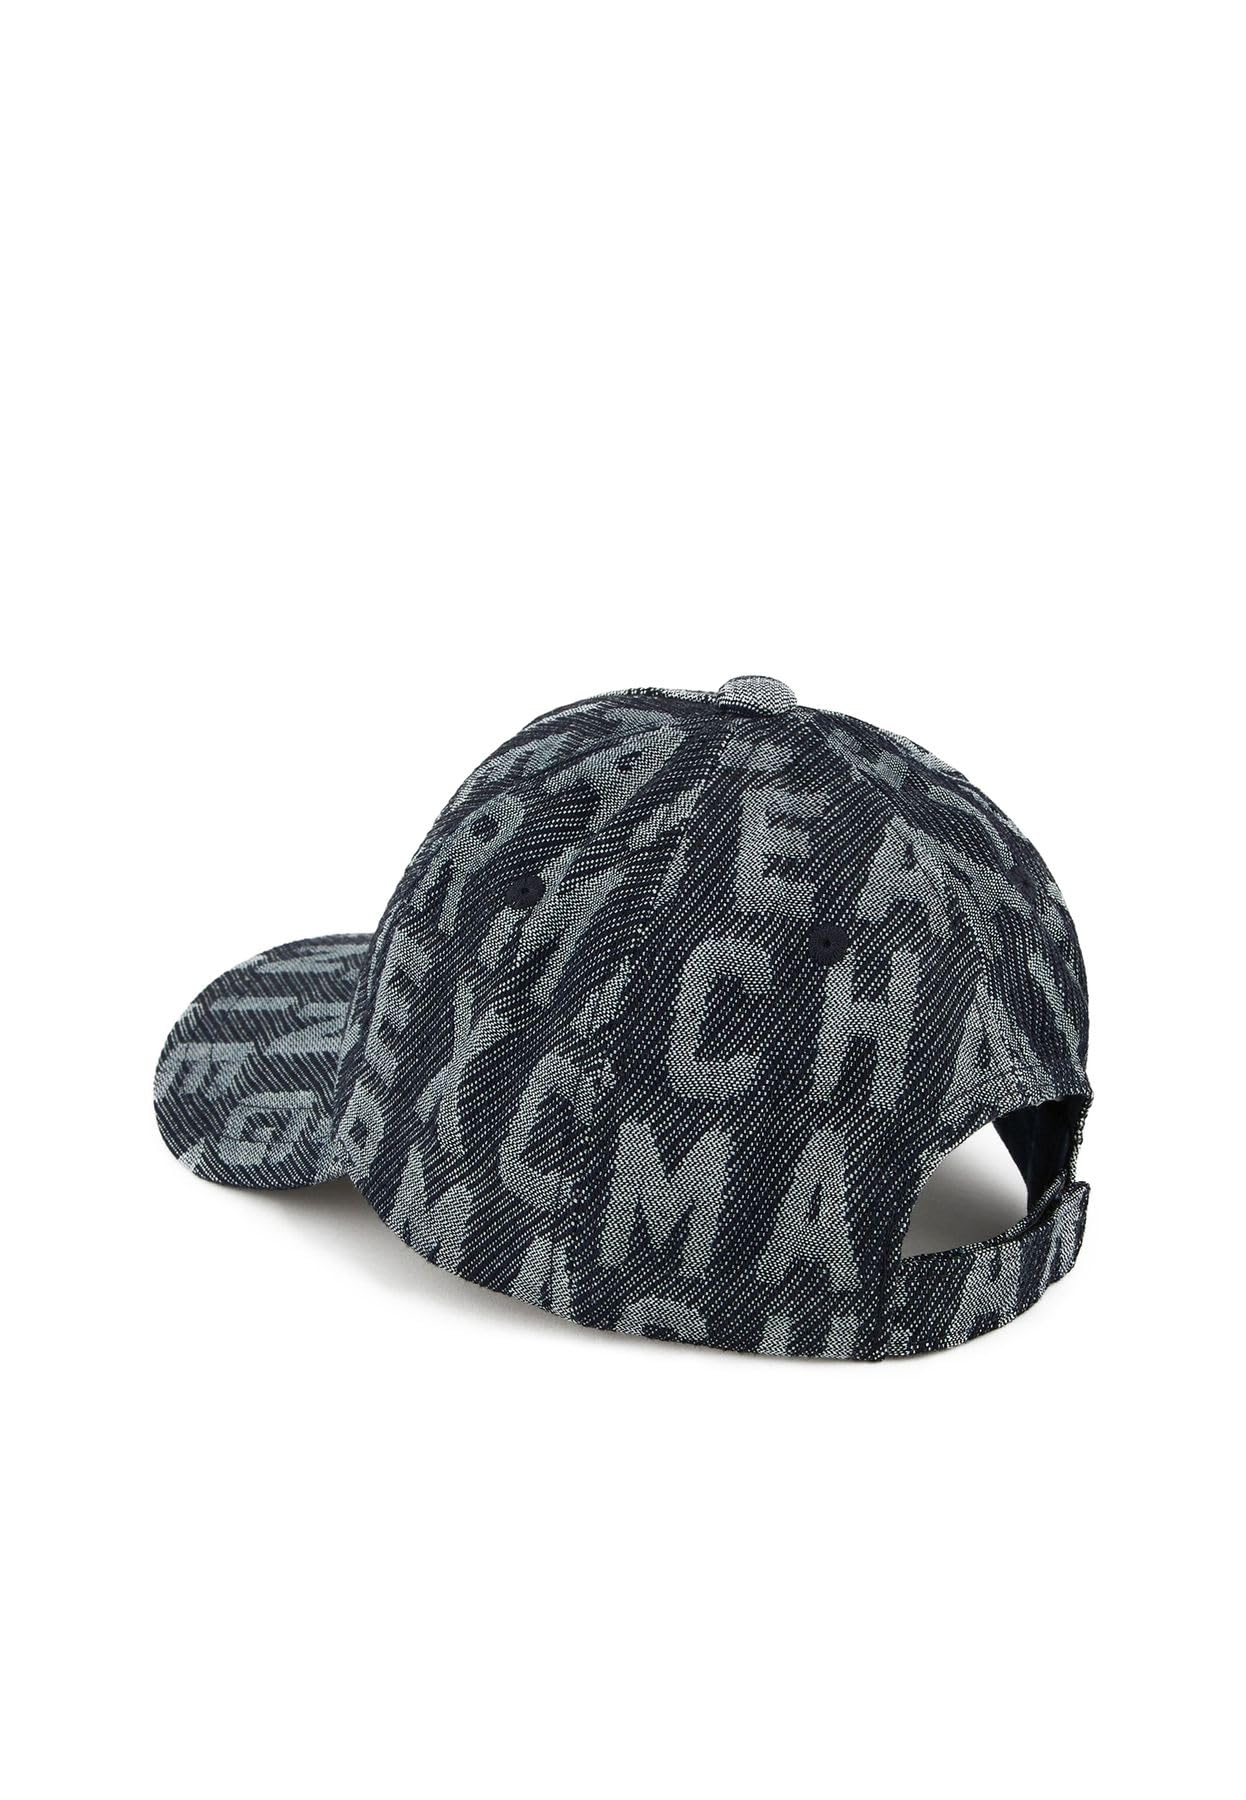 A | X ARMANI EXCHANGE Men's Limited Edition Denim Capsule Hat, Navy Allover Logo - Caps Fitted Caps Fitted Emporio Armani